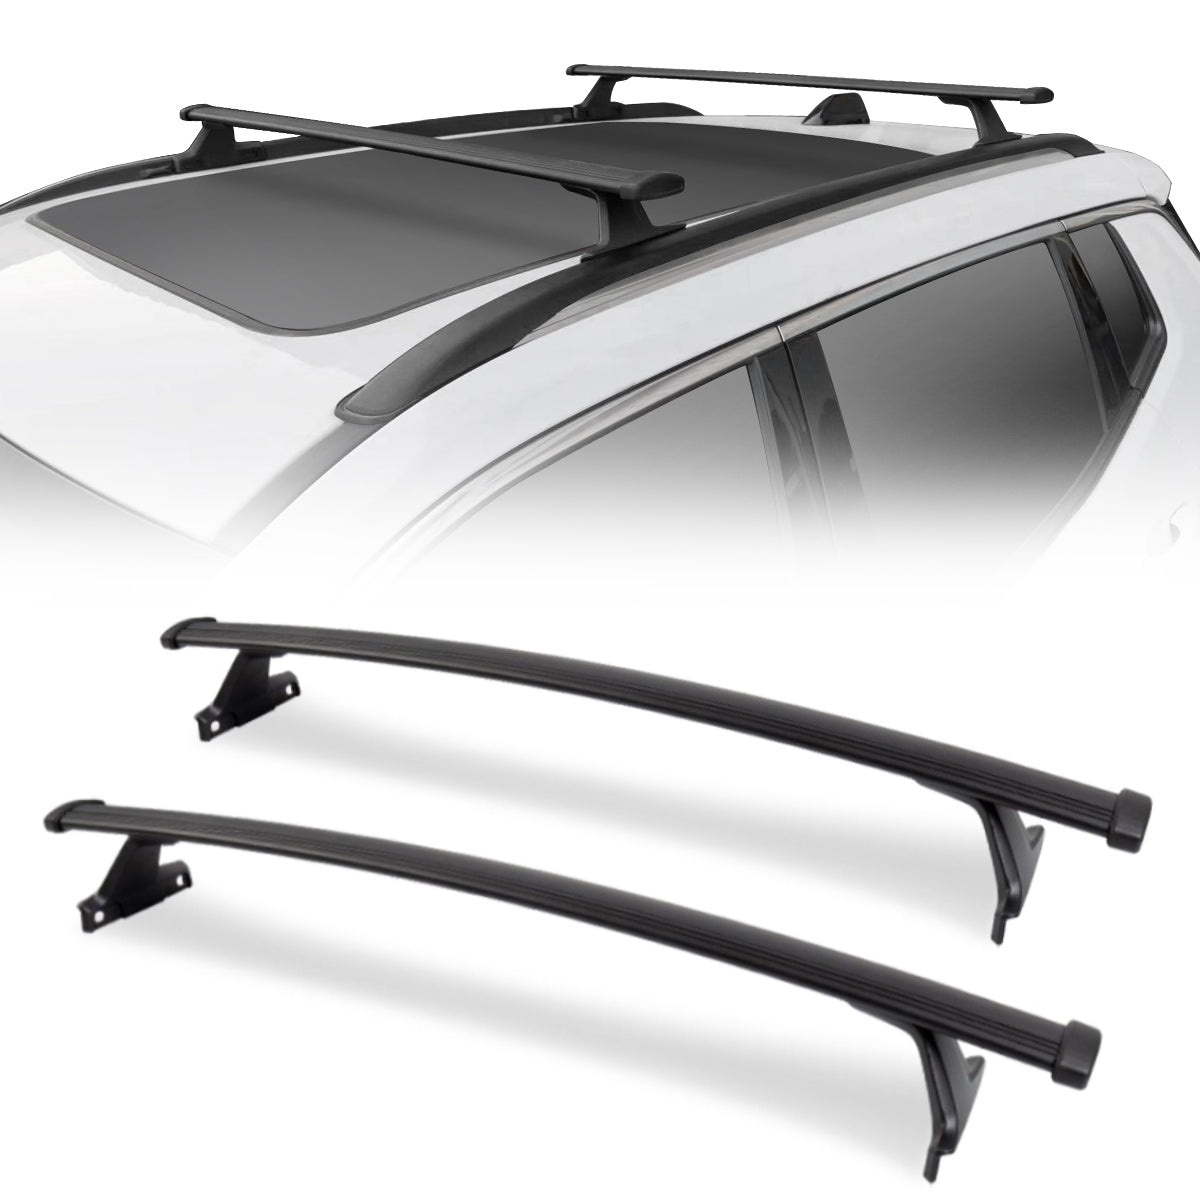 Roof Rack for Chevrolet Chevy Traverse 2018 2019 2020 2021